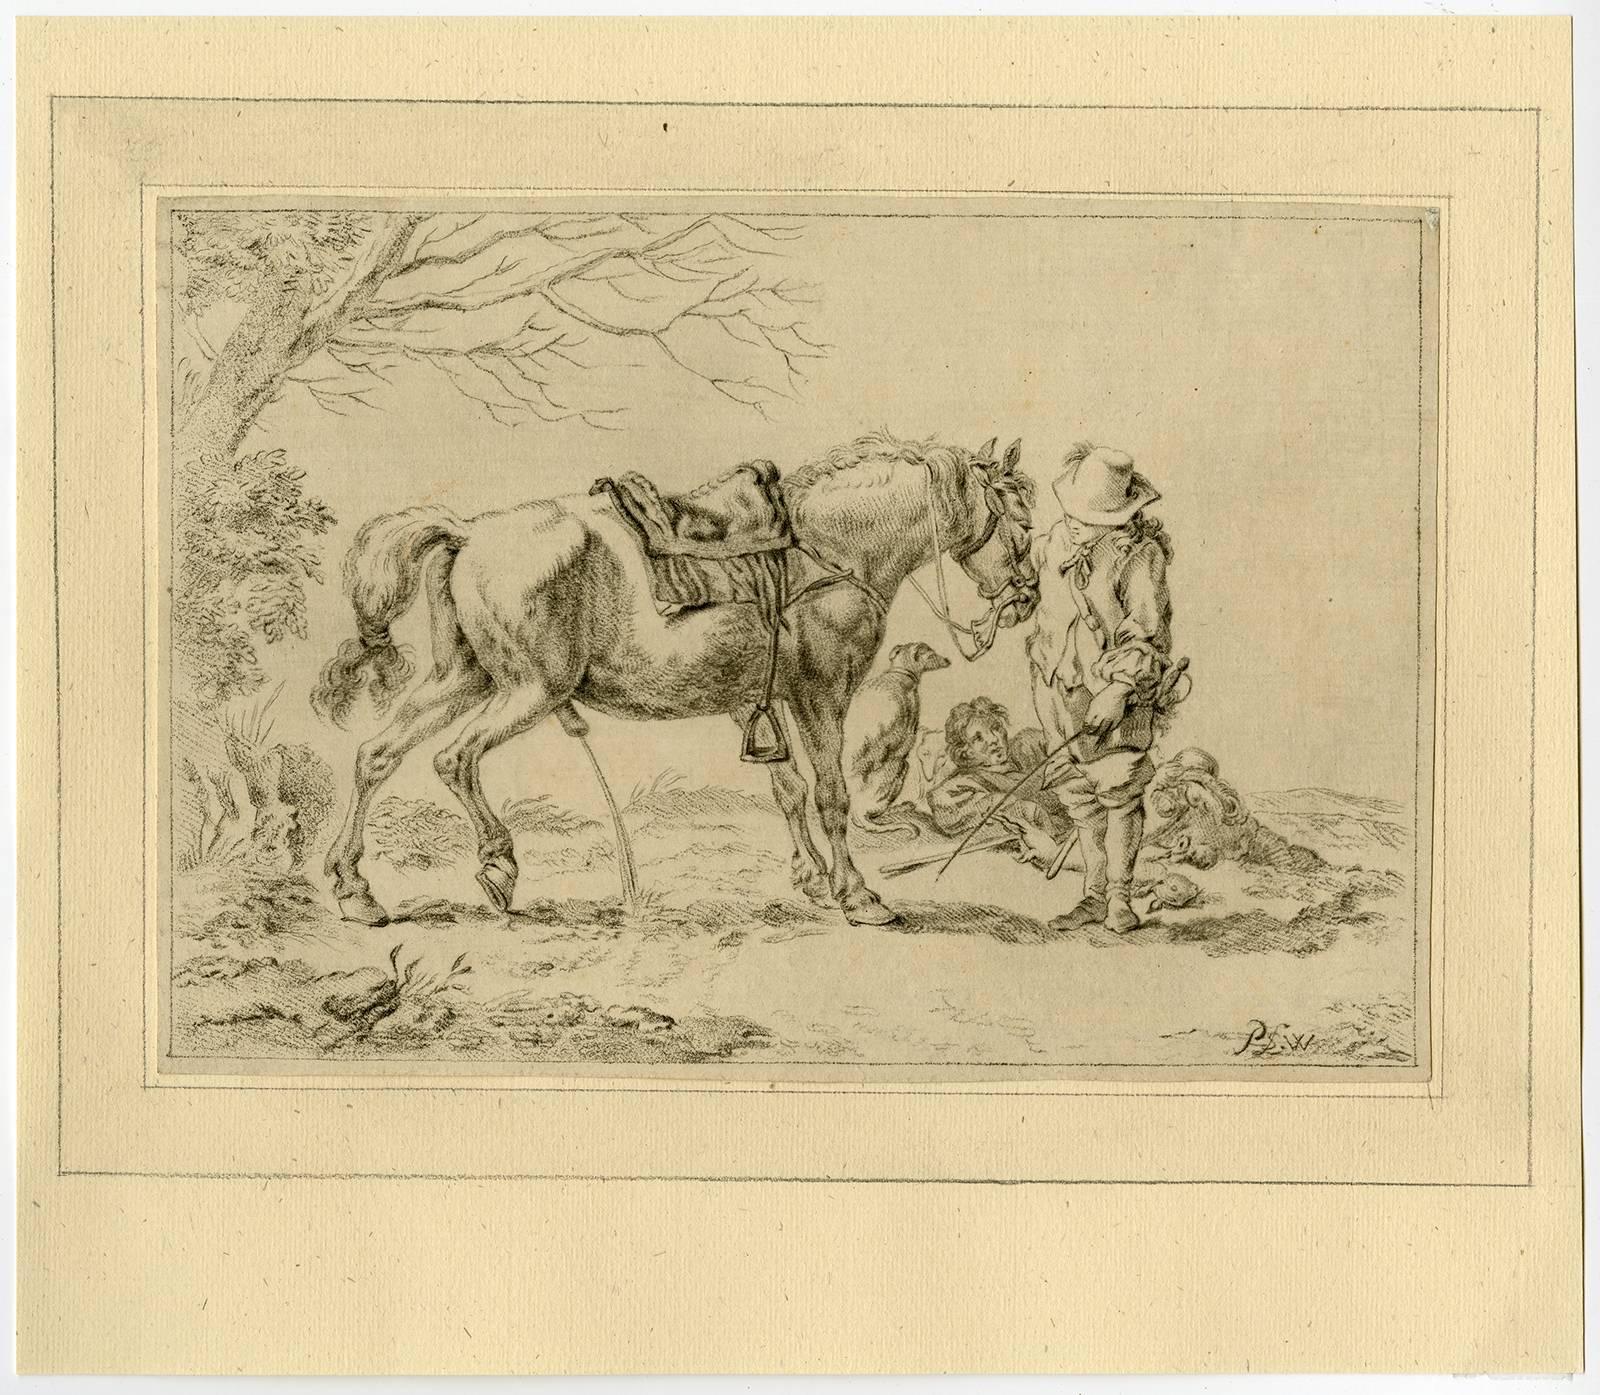 Jan Jacob Bijlaert Print - Untitled - A horse making water, with two riders and a dog present.